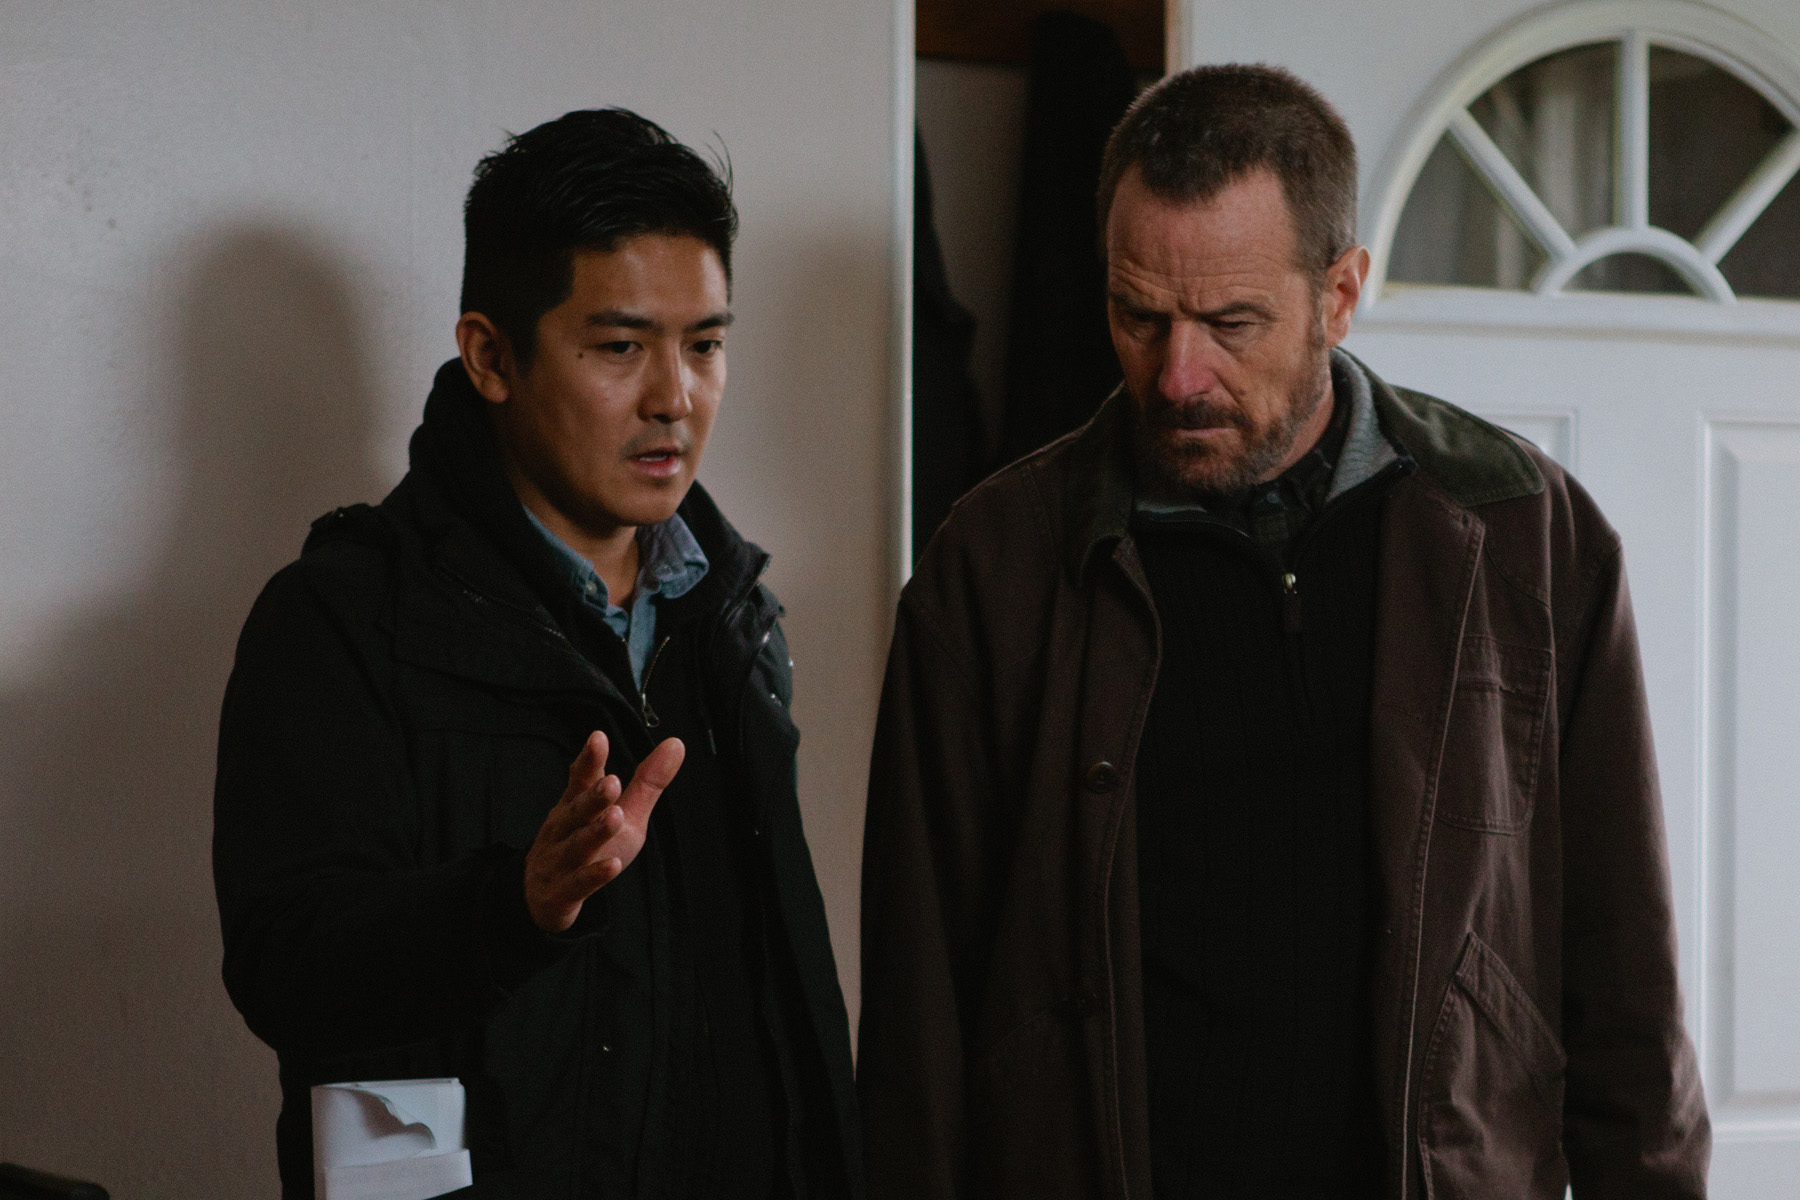 Tze Chun and Bryan Cranston on the set of Cold Comes the Night (2014)